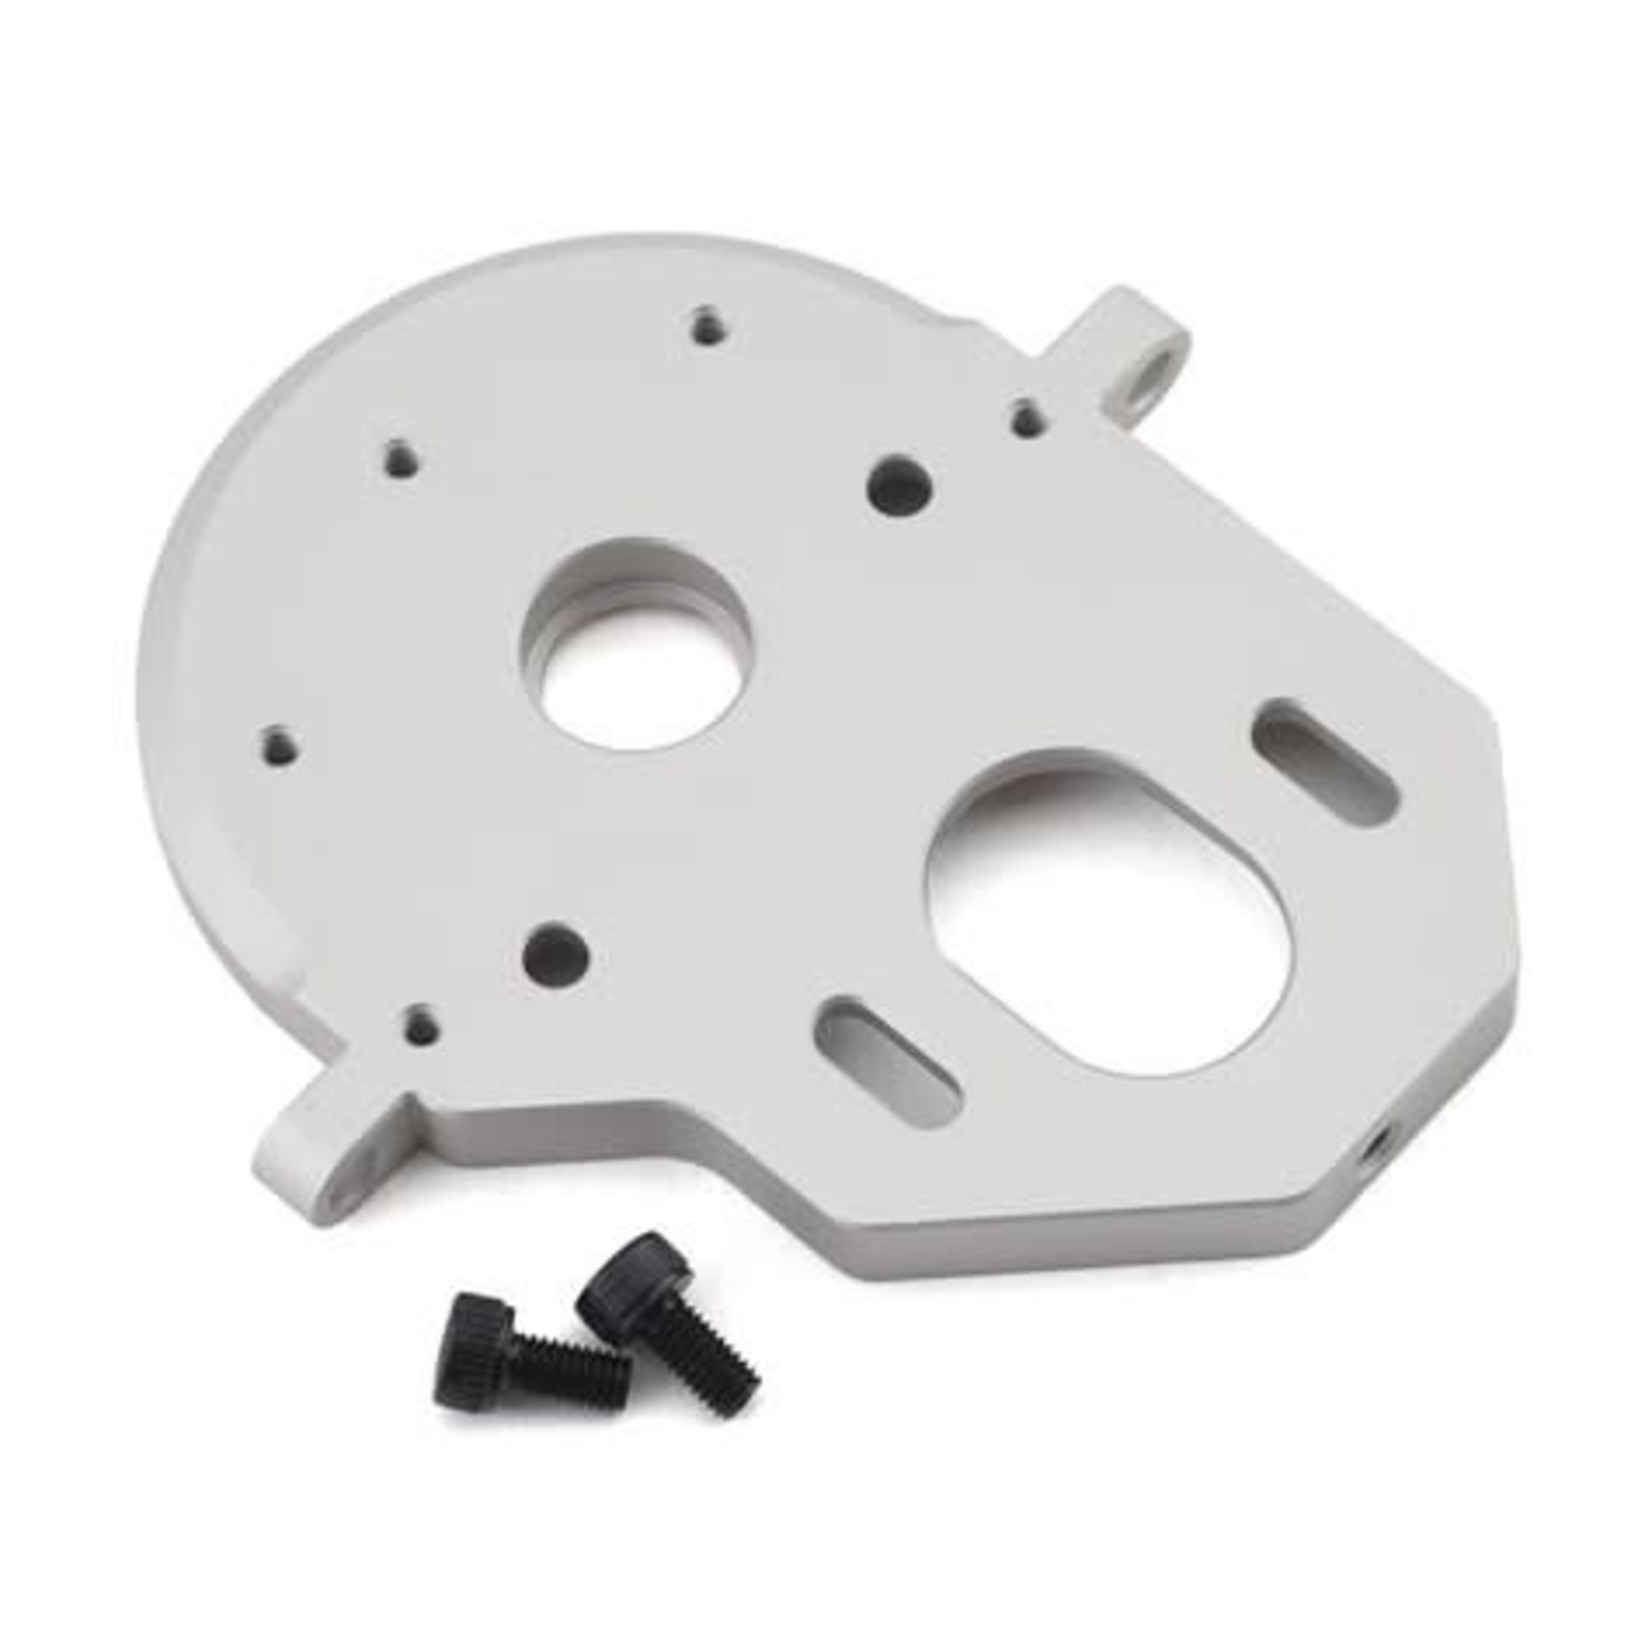 Vanquish Products Vanquish Products VFD Aluminum Light Weight Motorplate (Silver) #VPS10149